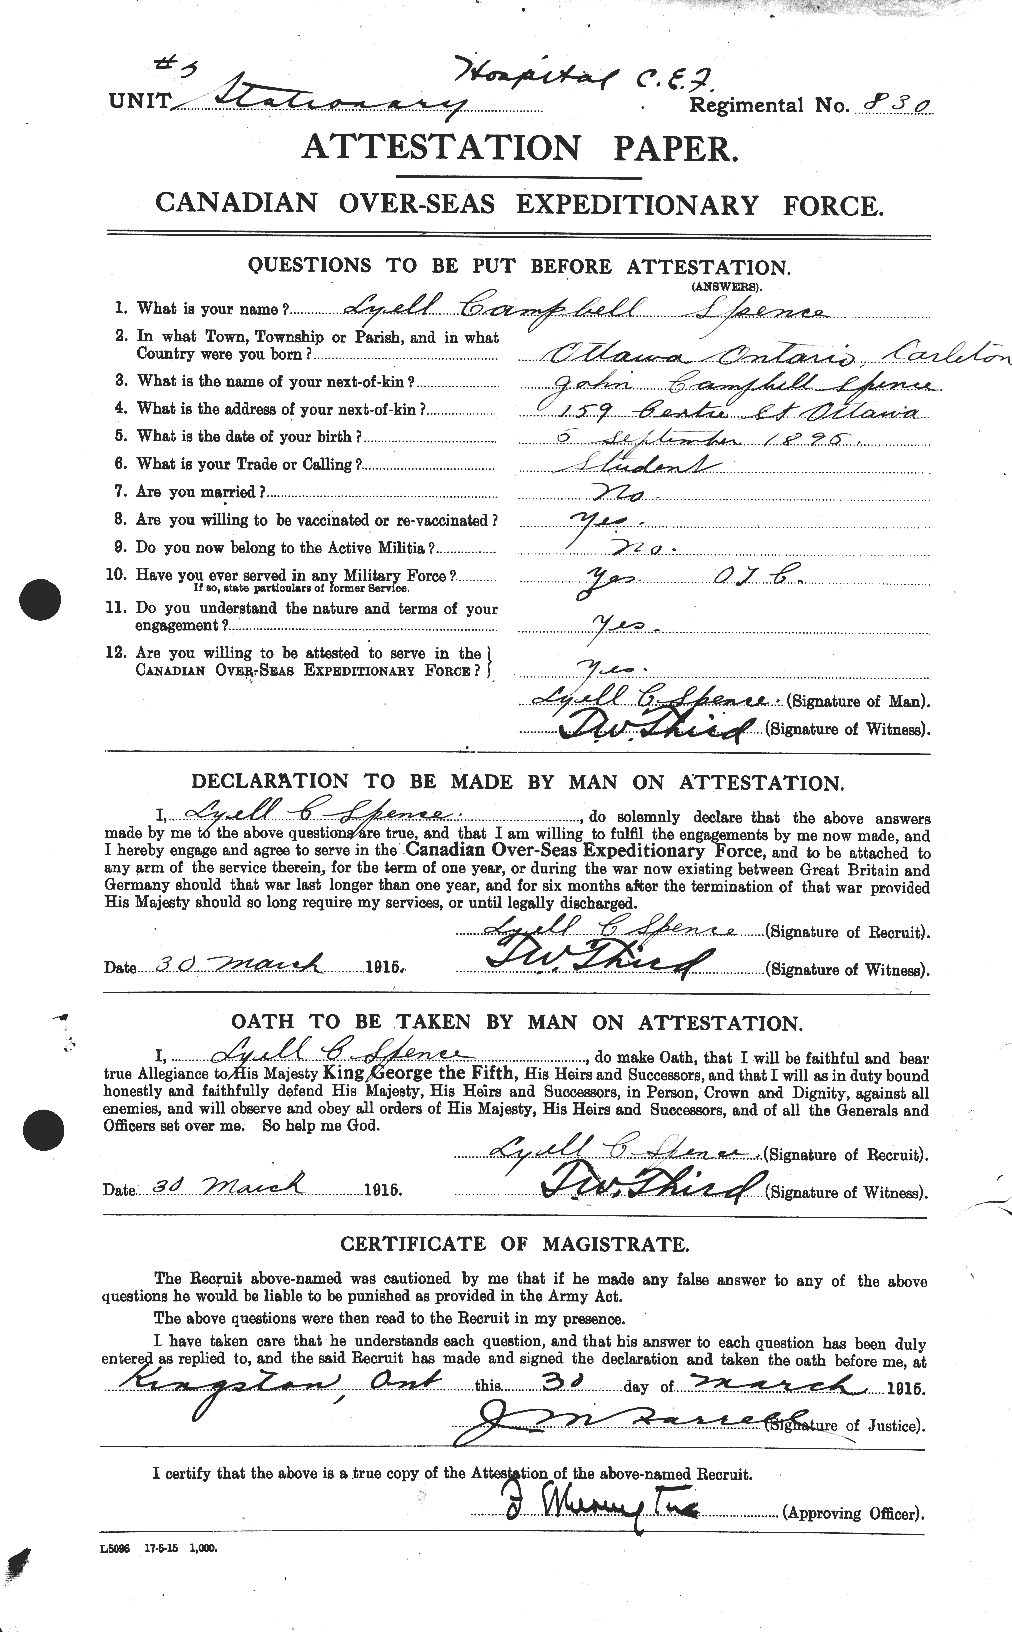 Personnel Records of the First World War - CEF 621393a